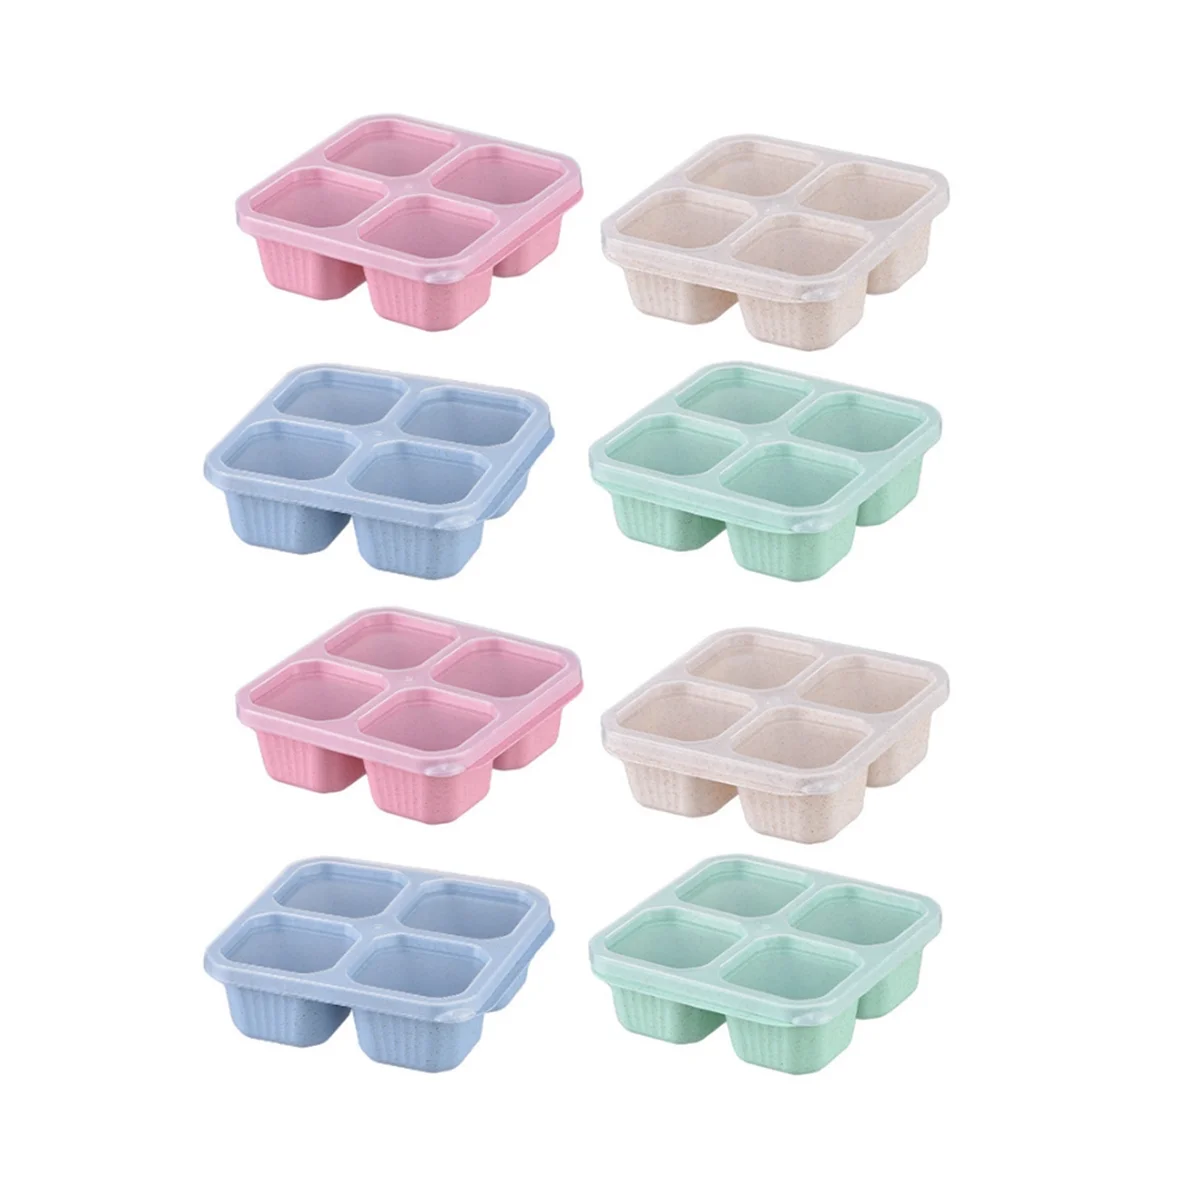 

Snack Containers Reusable 4 Divided Compartments Bento Snack Box Meal Prep Containers with Snacks, Fruits, Nuts, Candies